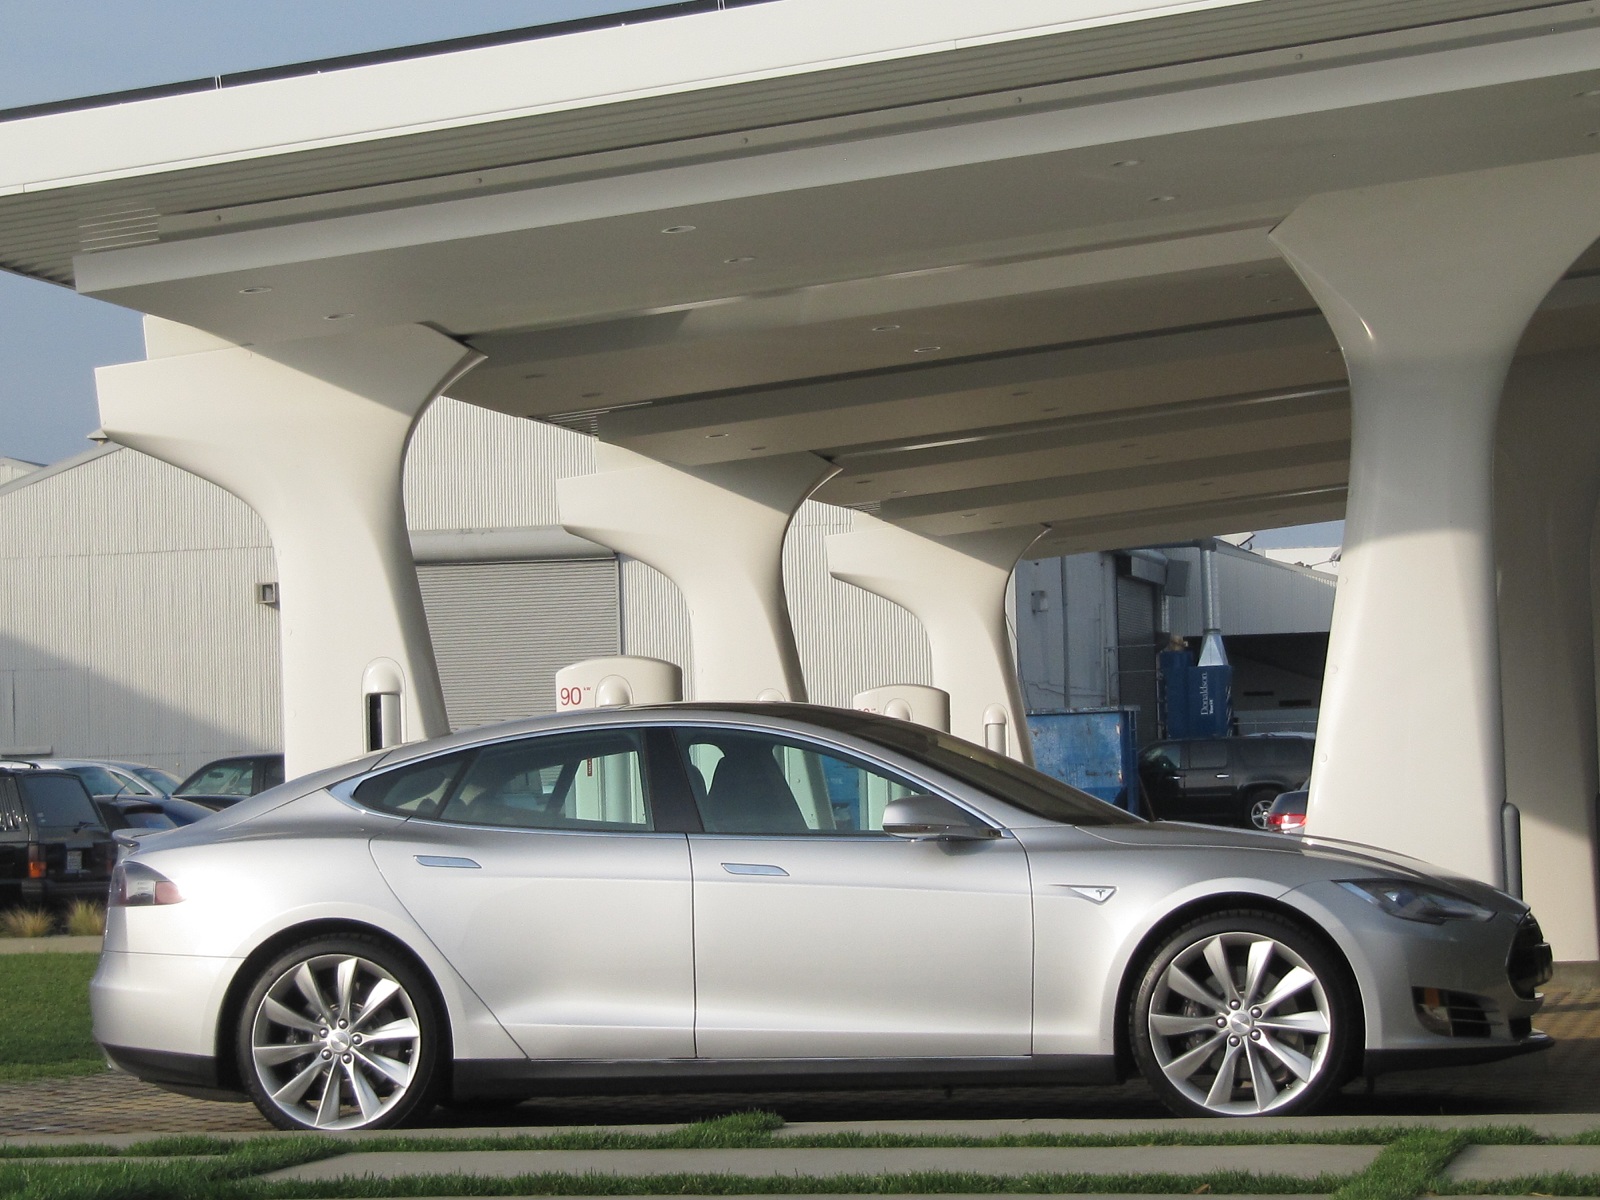 five facts about tesla electric cars that may surprise you